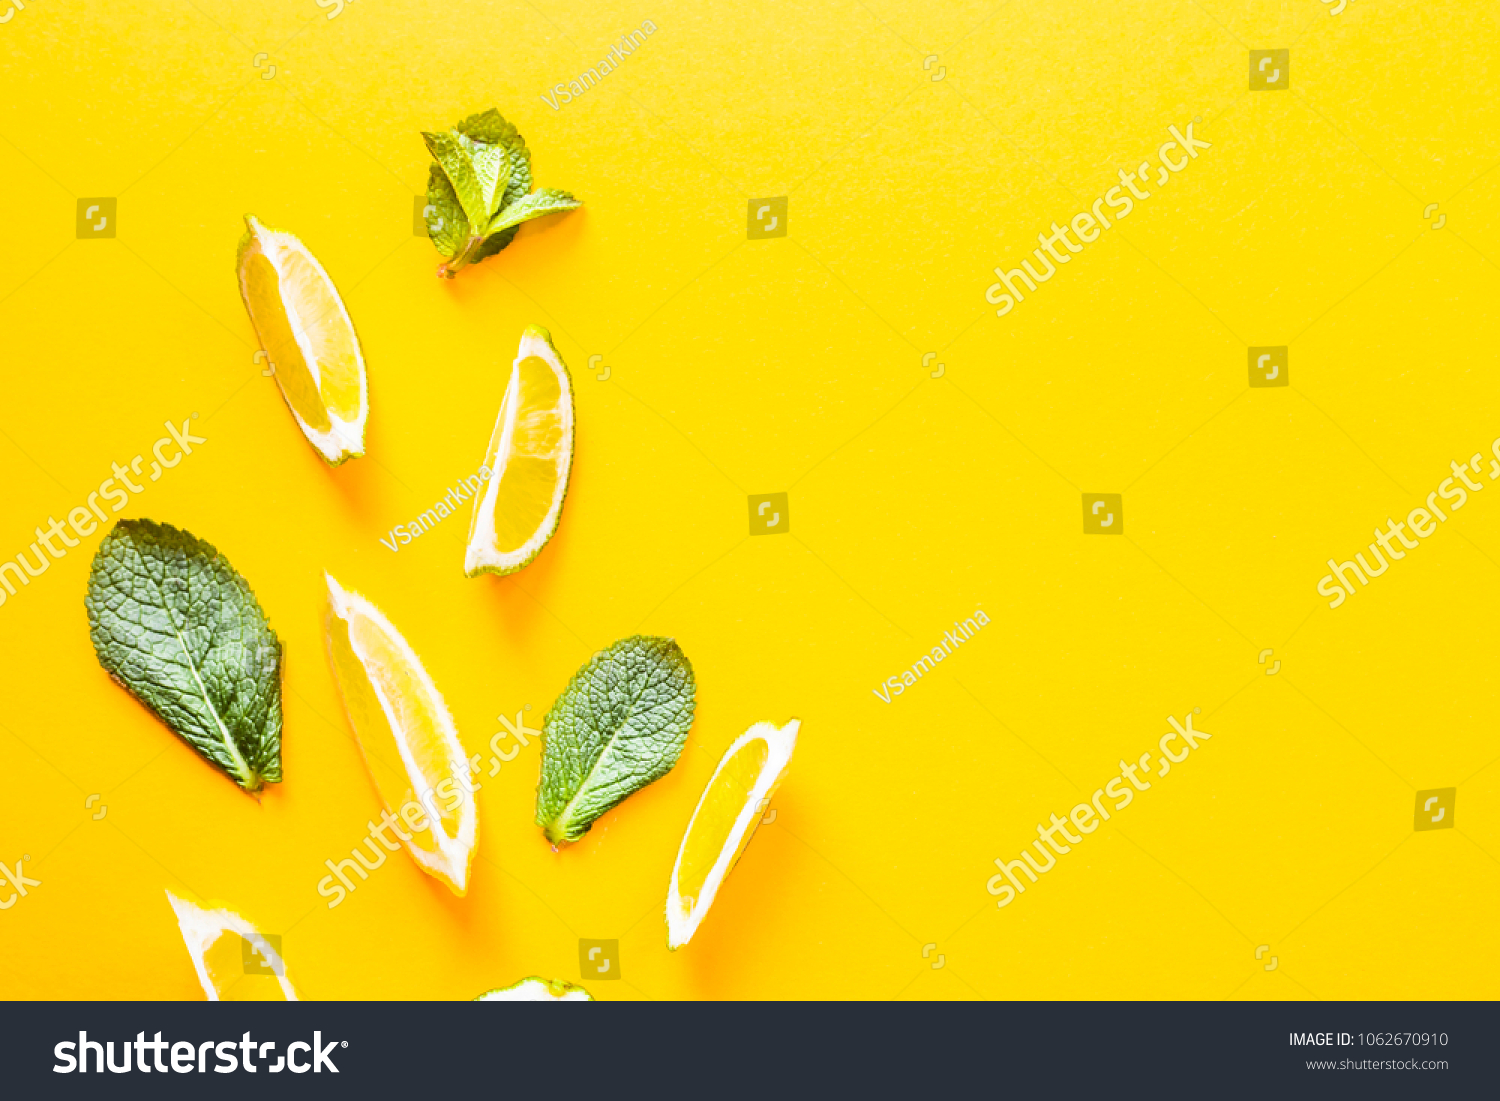 Pieces of lemon, lime and green mint leaves on a yellow background. Summer products for making lemonade. Top view, flat lay, copyspace #1062670910